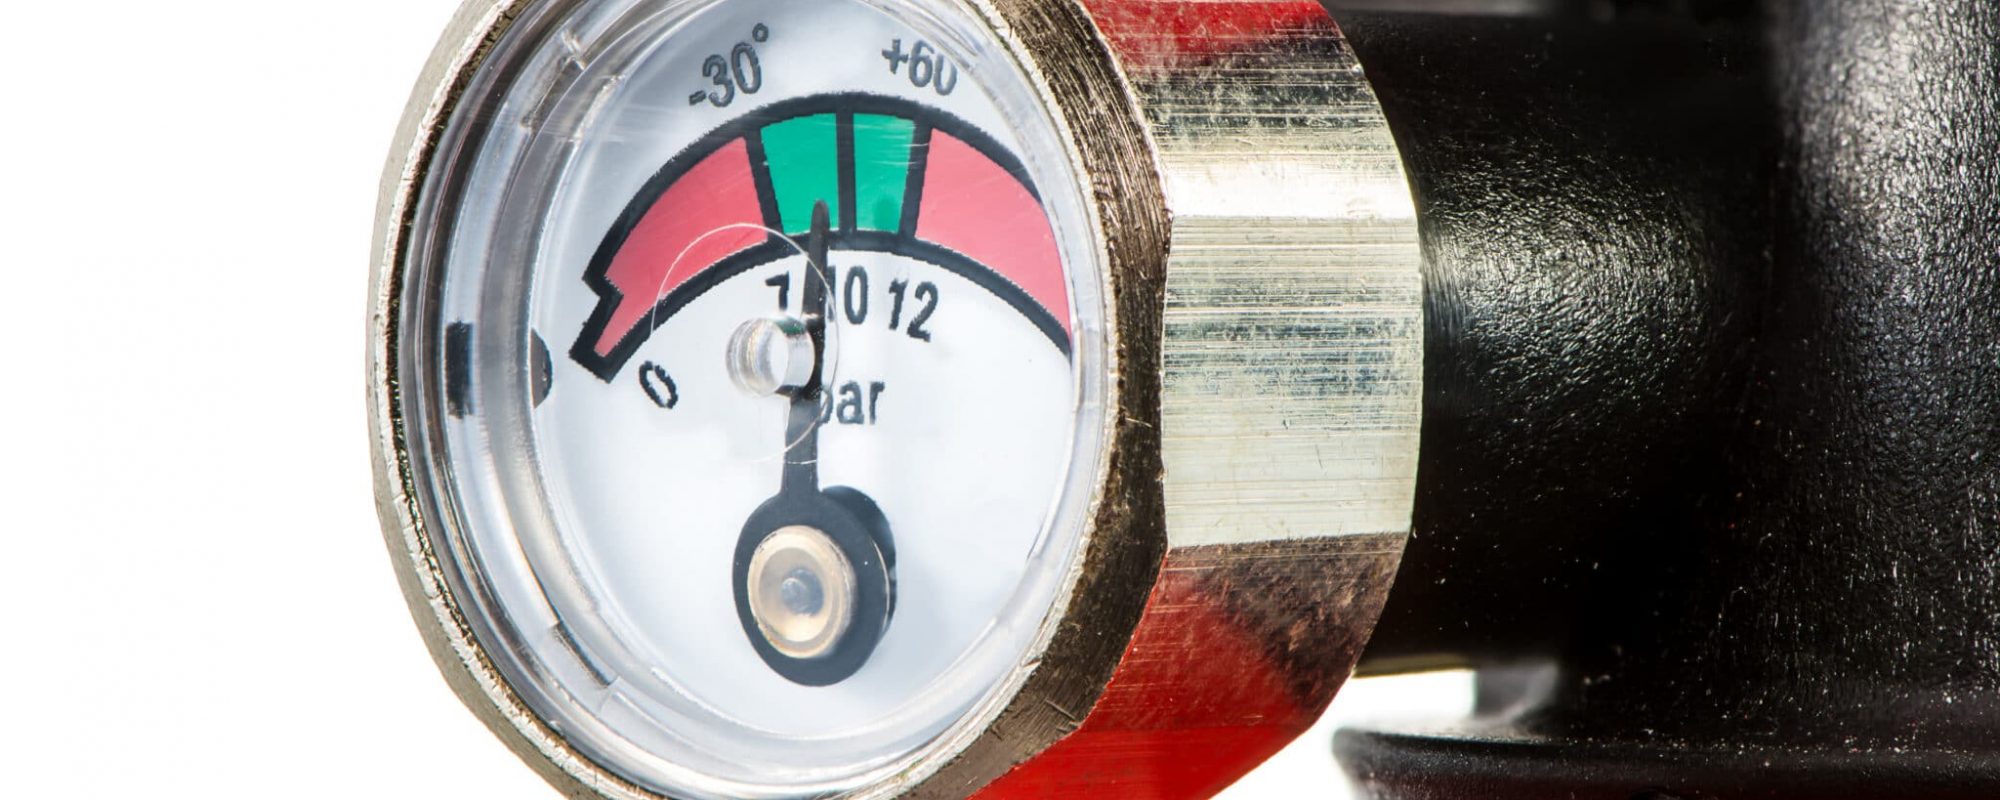 Manometer of a fire extinguisher. The pressure gauge is in the ideal range